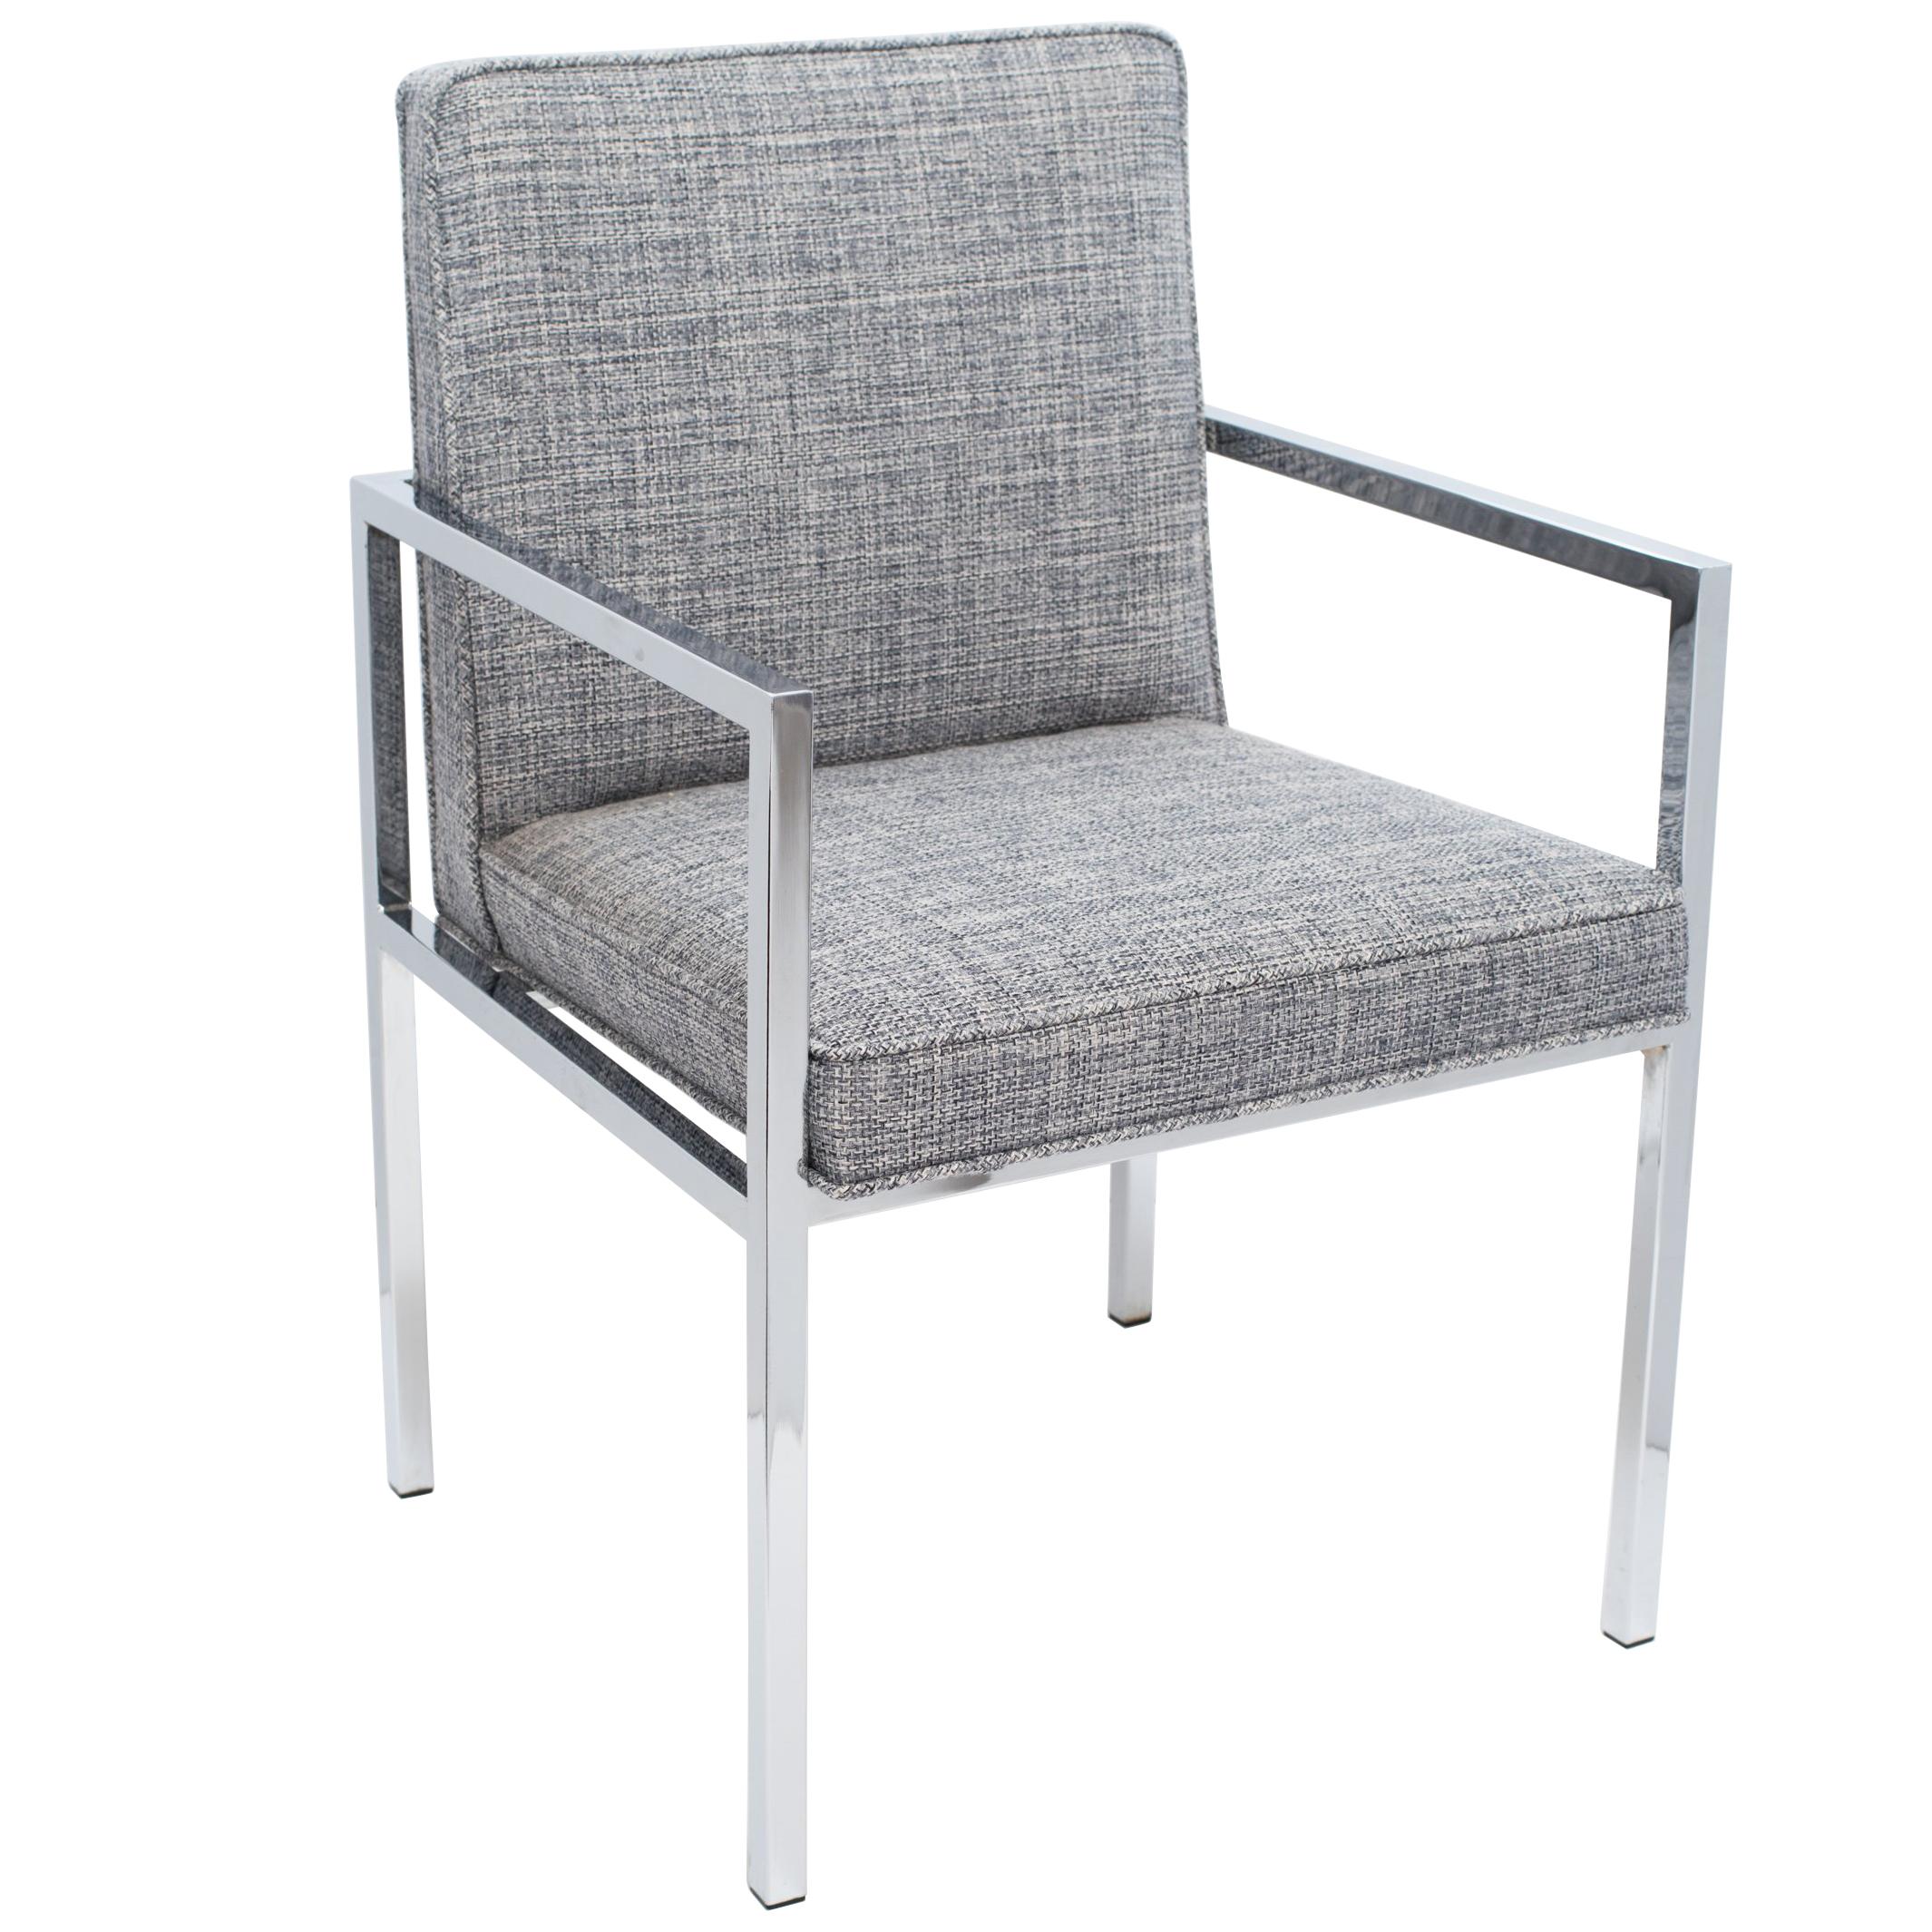 Mid-Century Modern desk chair or side chair with chromed cantilevered frame in the style of Milo Baughman. Newly upholstered in a woven textile by Rogers & Goffigon fabric in hues of steel blue and grey heather (cotton/linen).